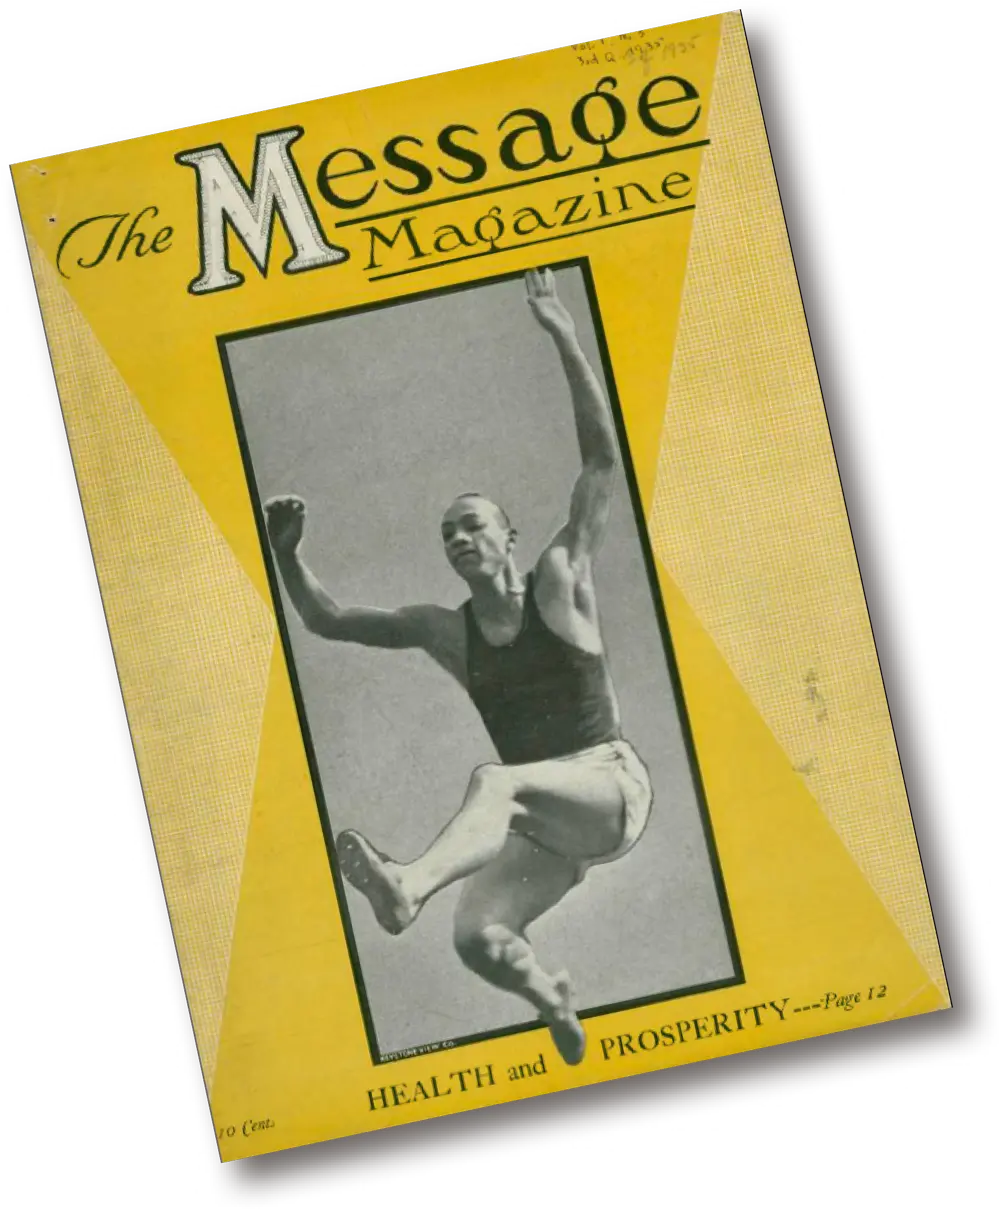 July/August 1935 issue cover of Message Magazine